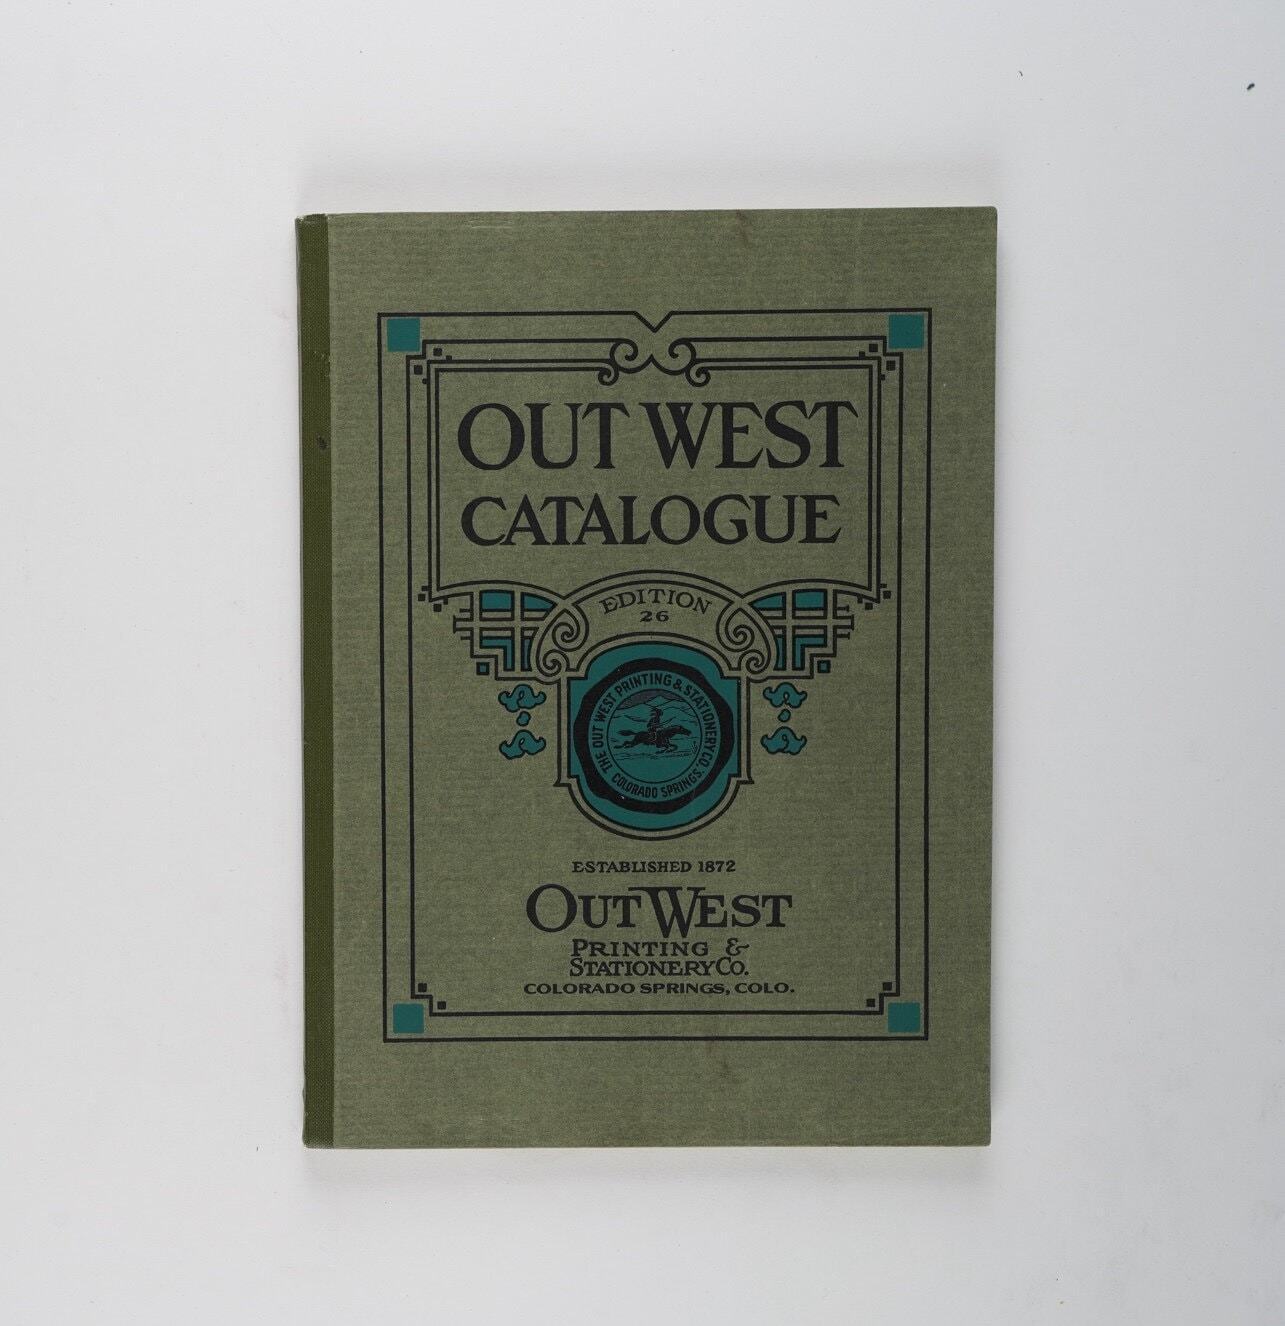 1920s Catalog of Office Supplies by Out West Company